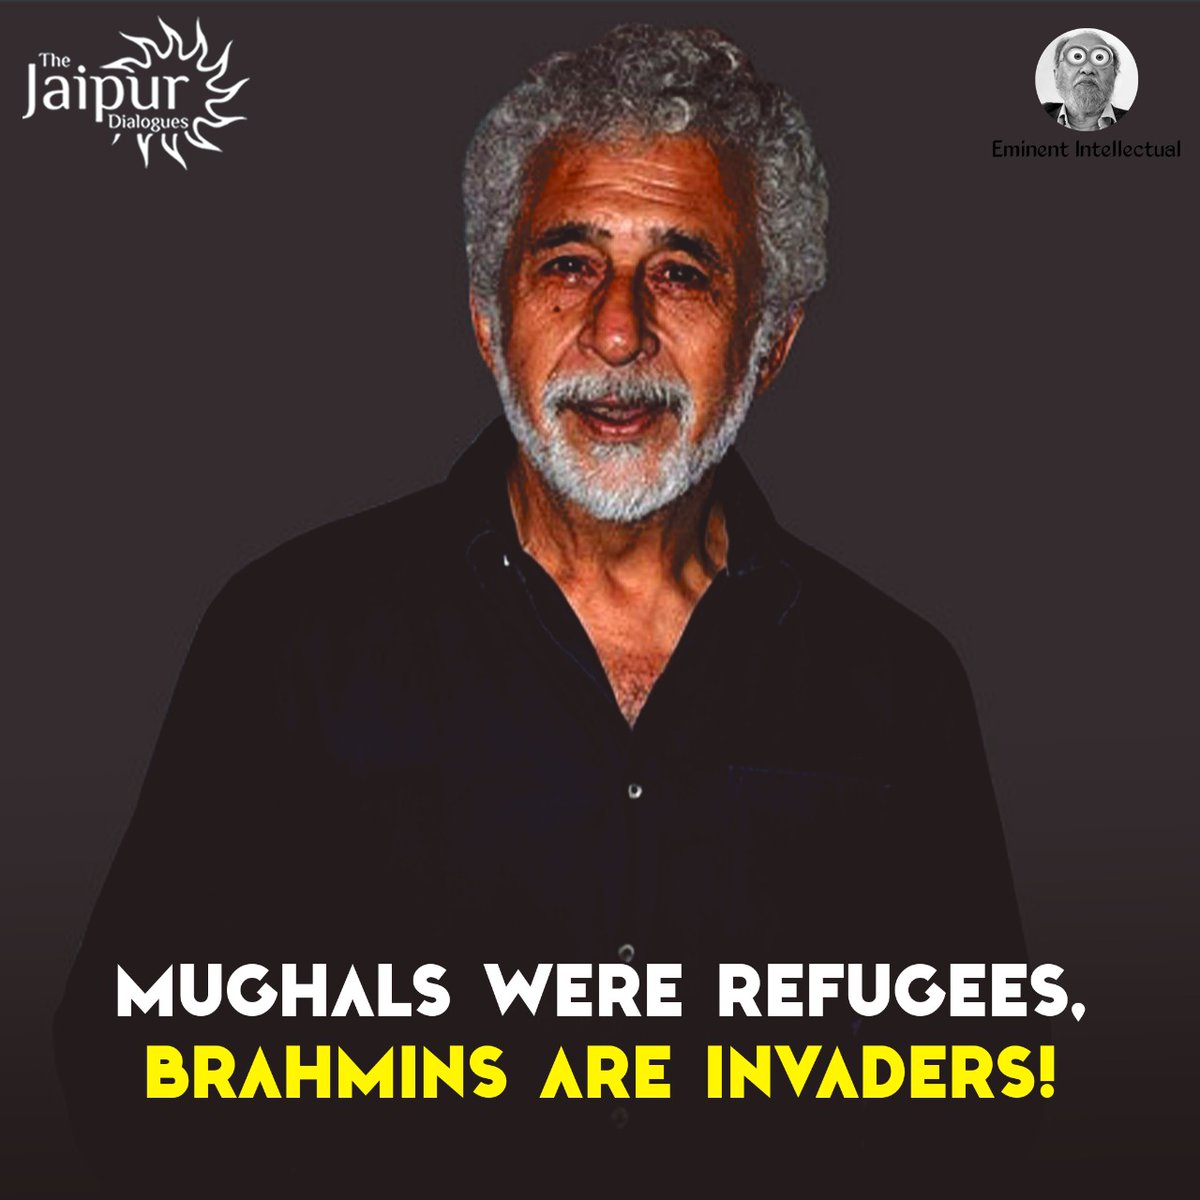 RT @JaipurDialogues: Just like Hizbul-Mujah:ddin is a refugee. https://t.co/zNZcXWXWaB